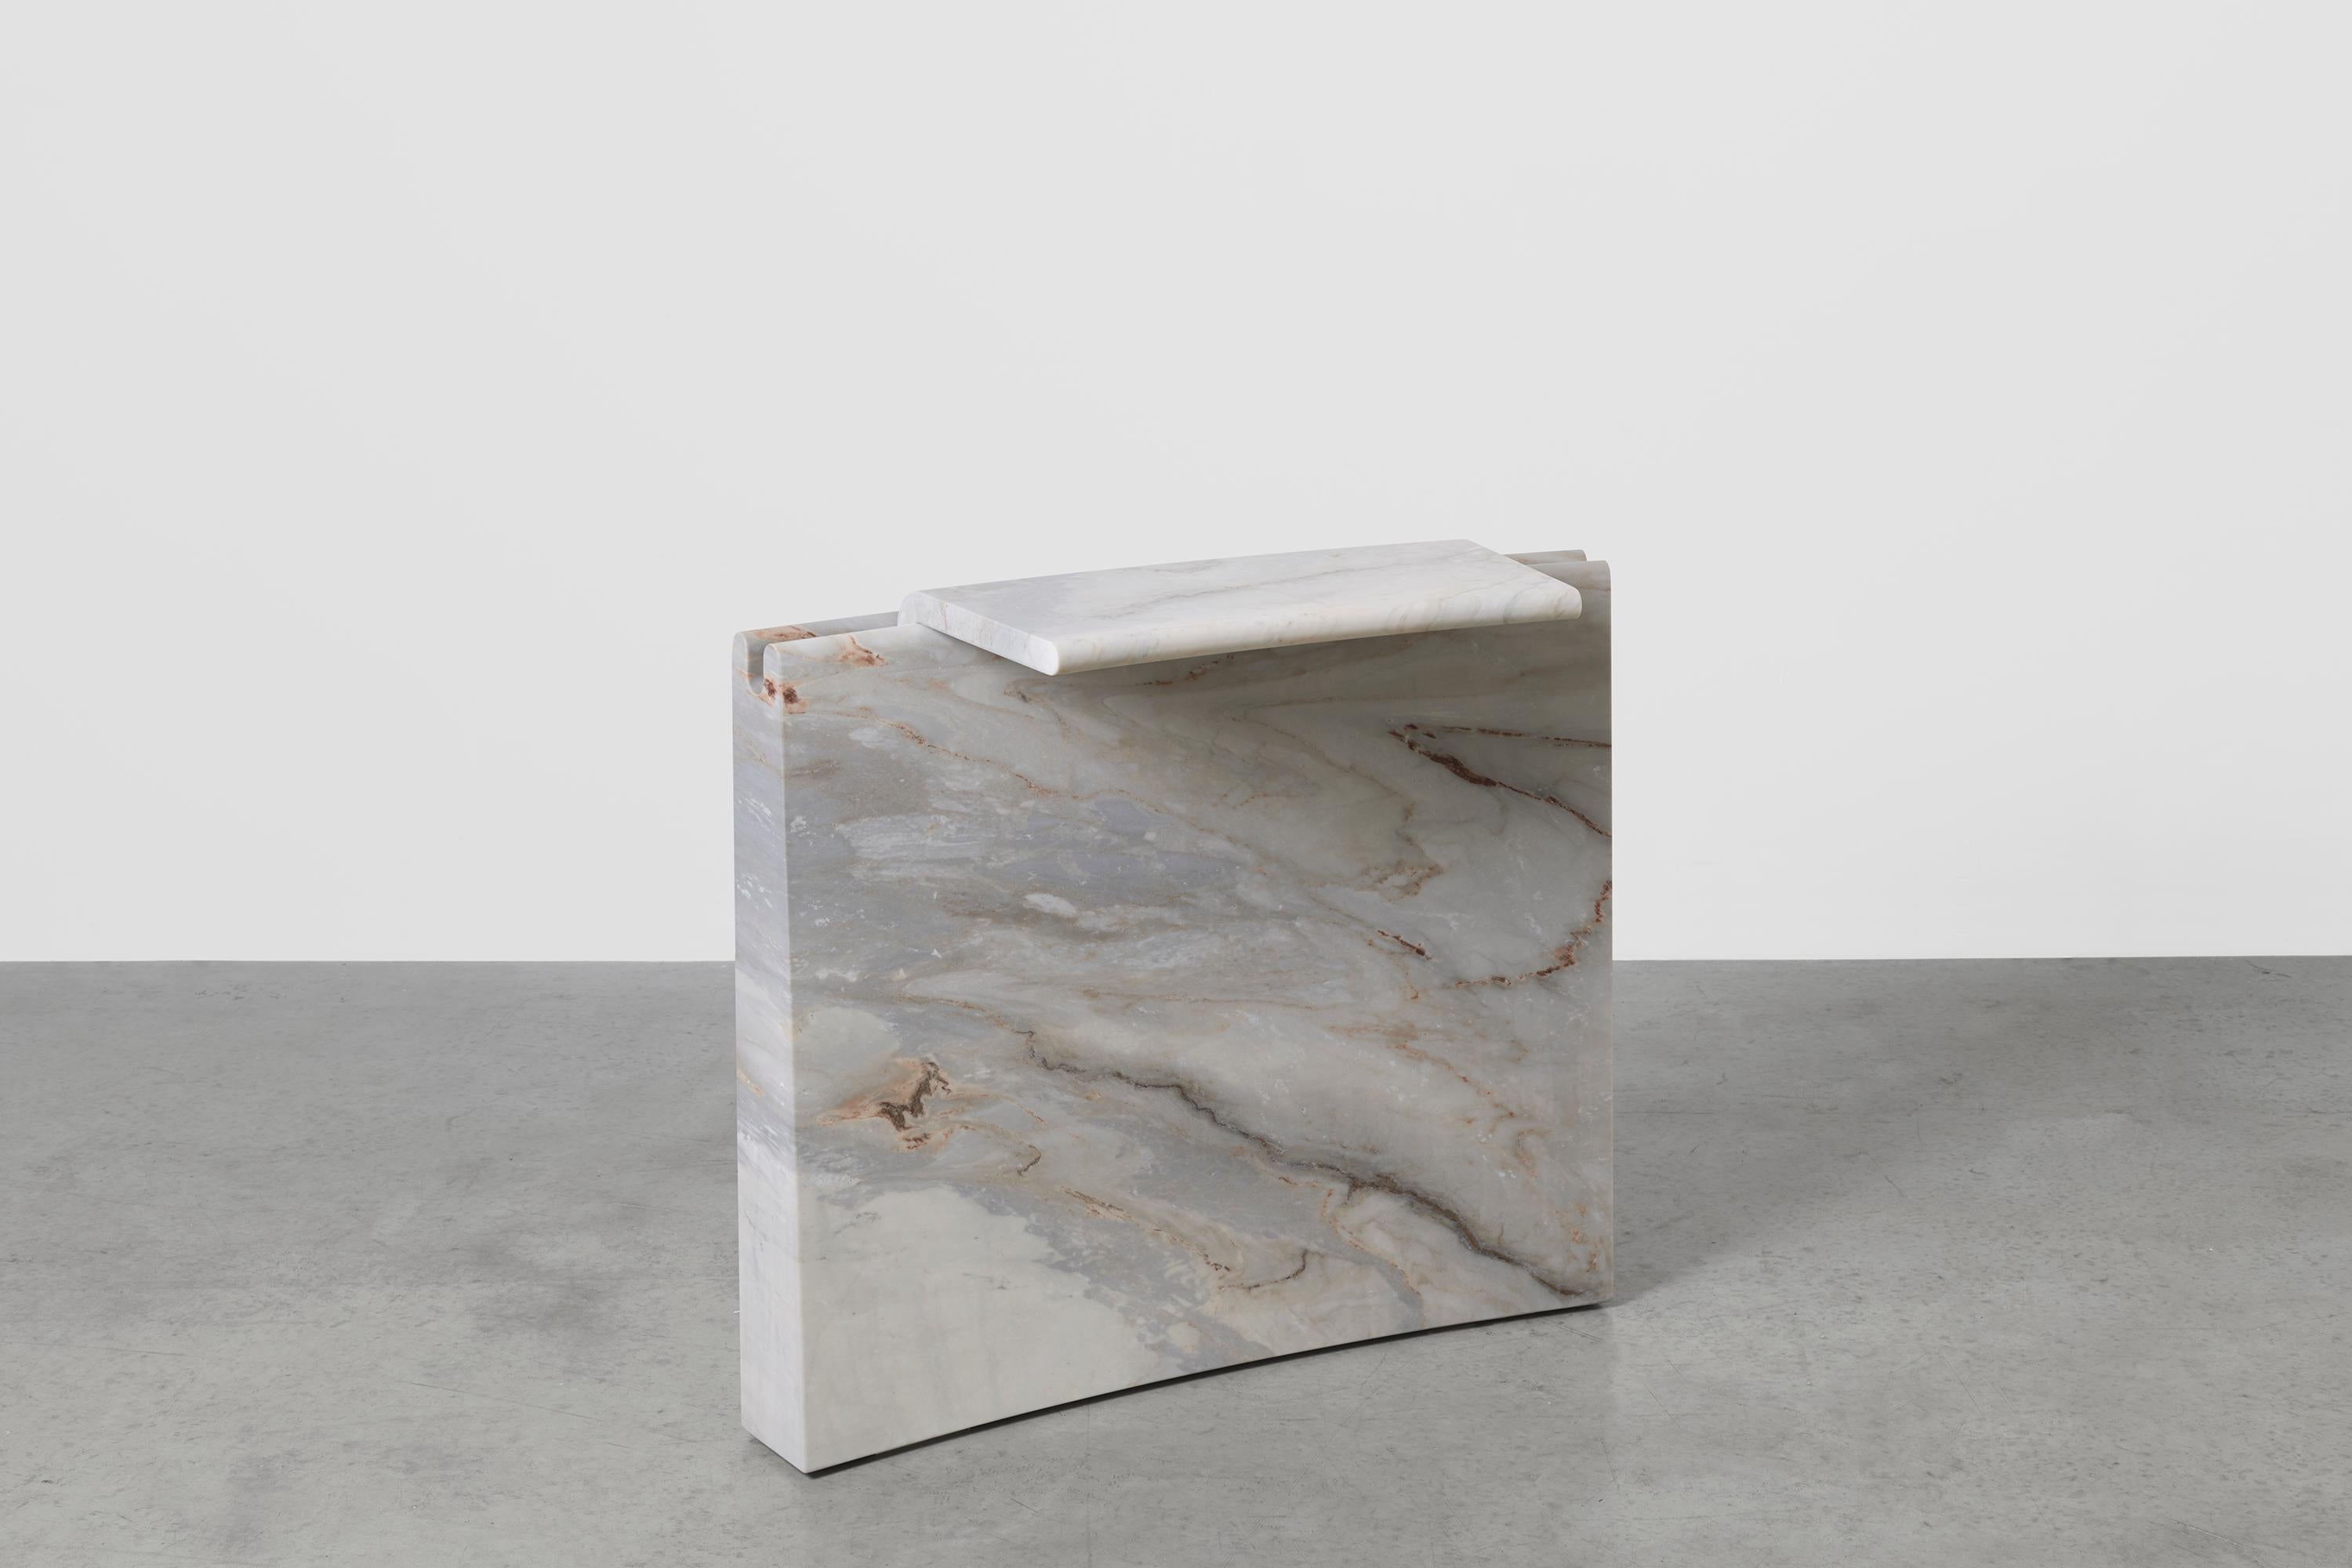 Small Palissandro Bluette marble mass x Fred Ganim
Dimensions: W 93 x D 36 x H 80 cm.
Materials: Palissandro bluette marble.

Grounded by its weight, the sheer mass of the material uses gravity as a structural force, cantilevering a system of